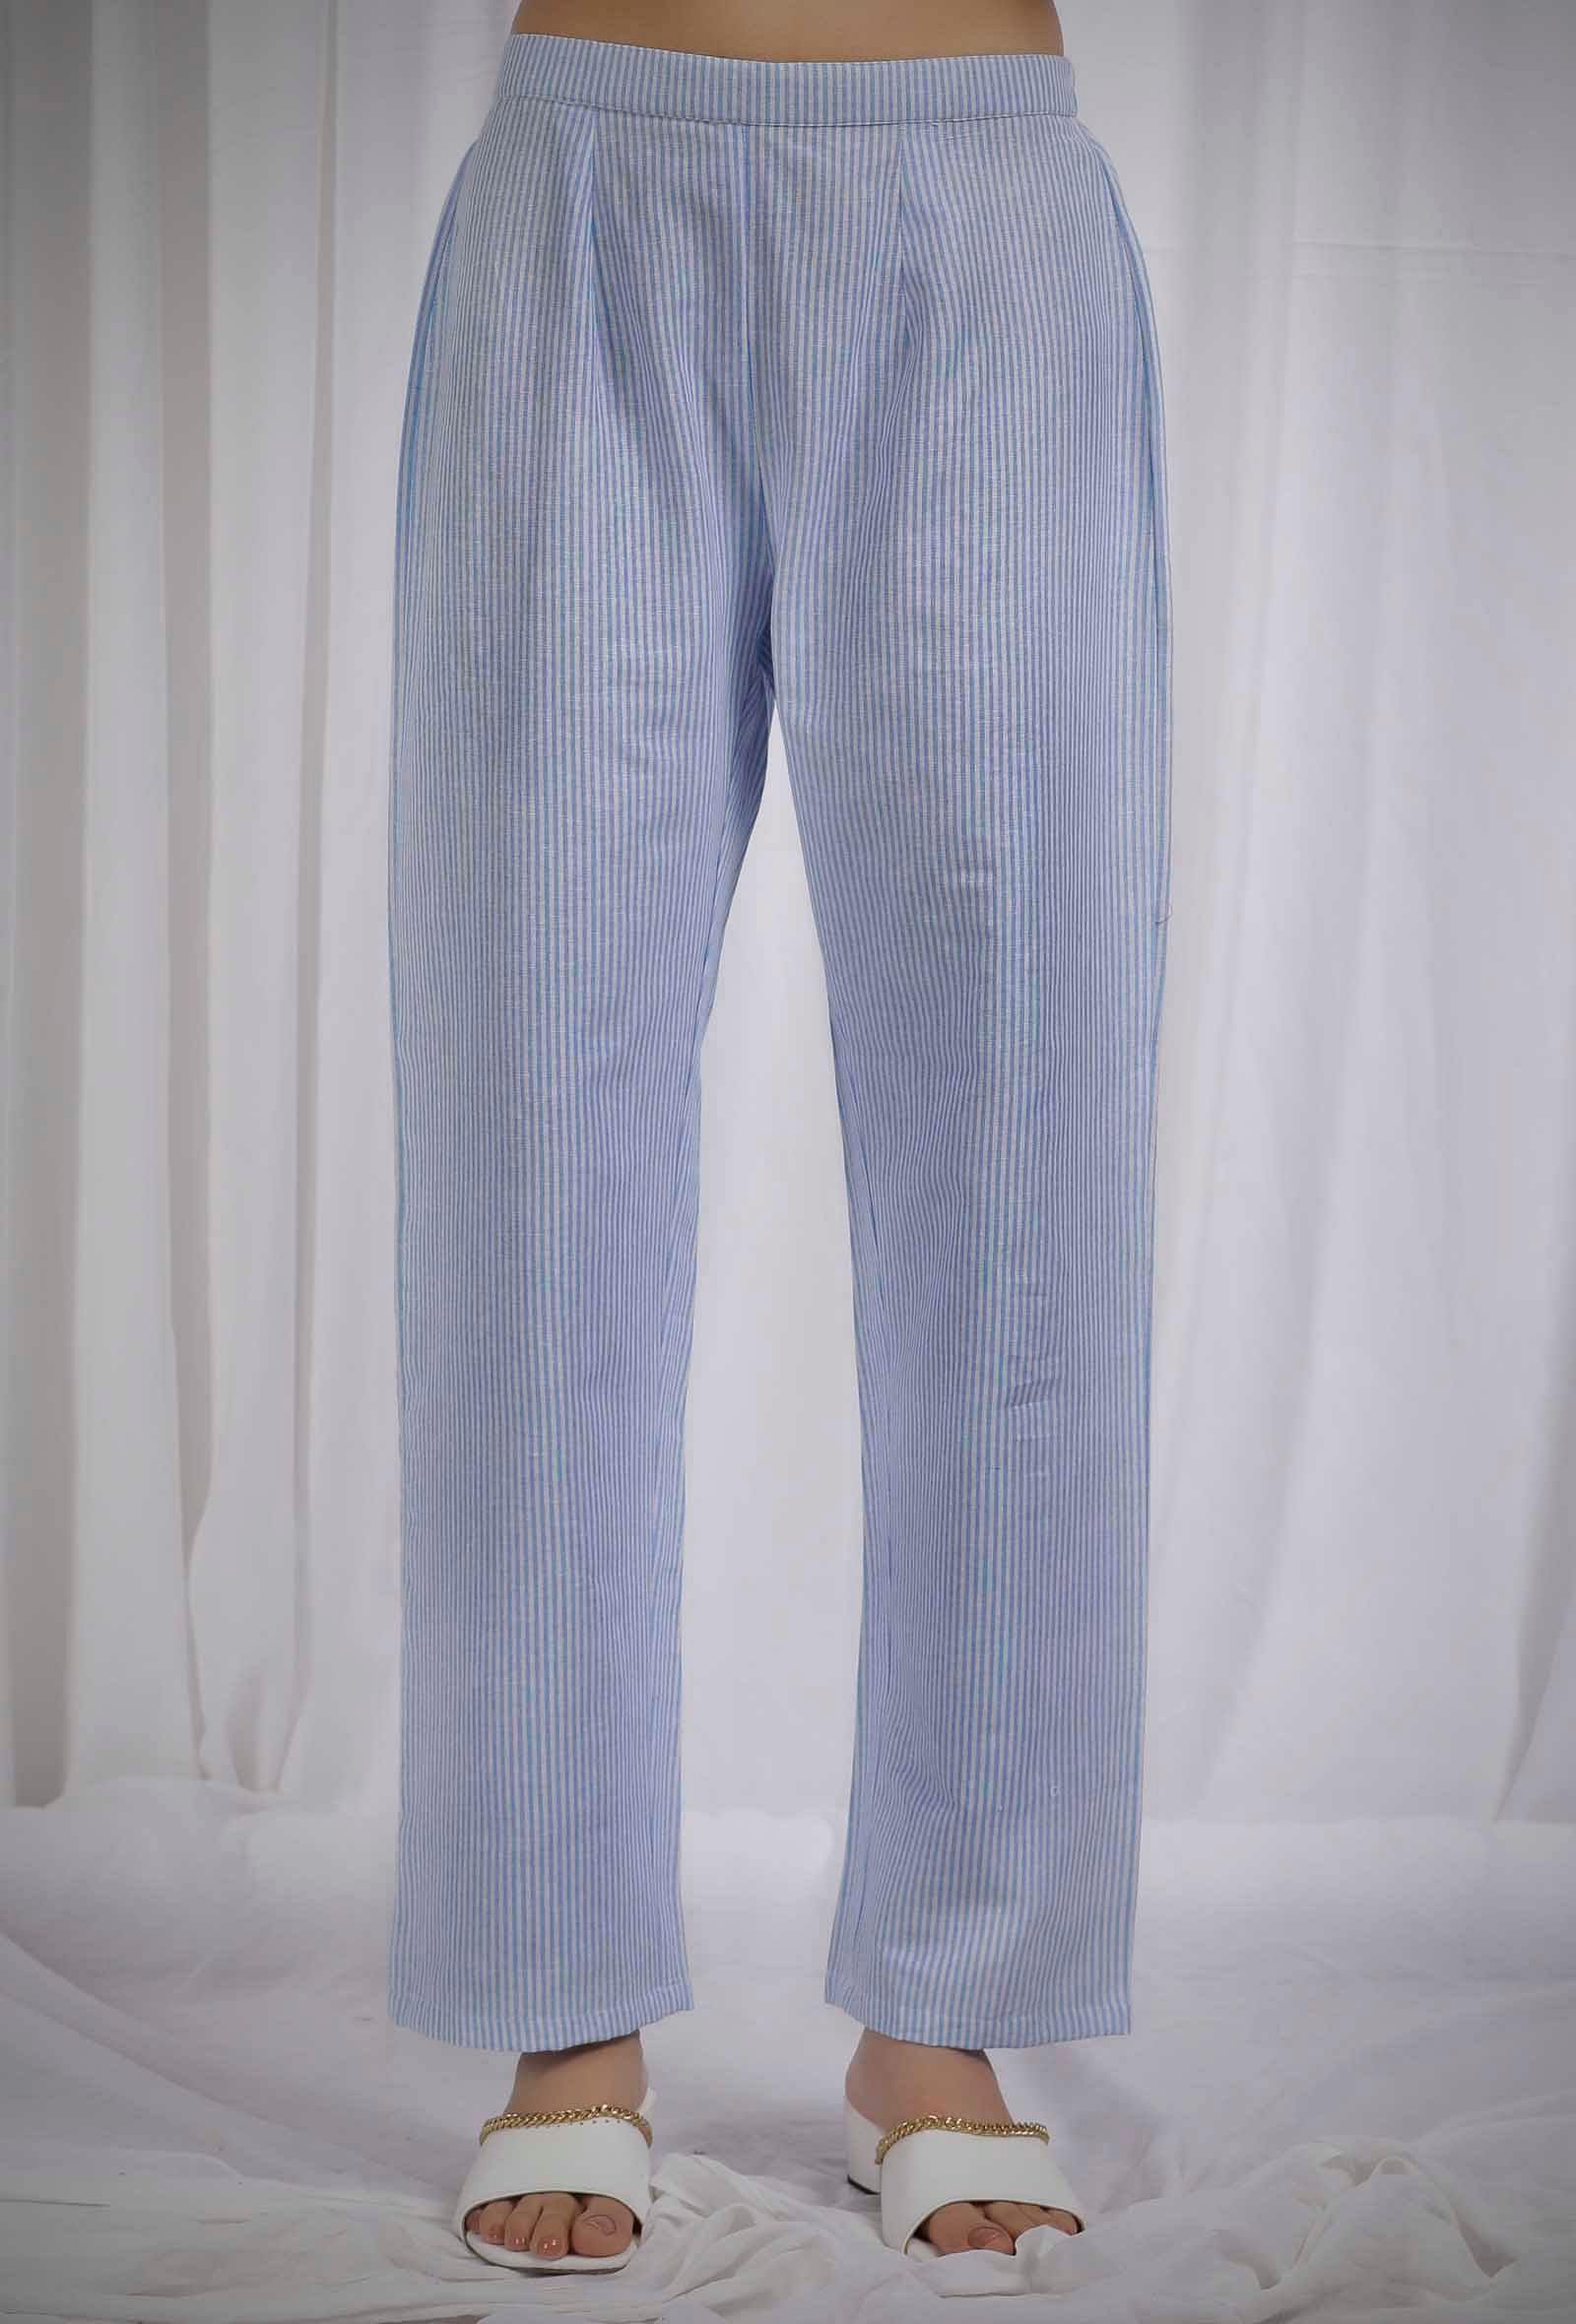 Cotton Mix Striped Relaxed Fit Pants